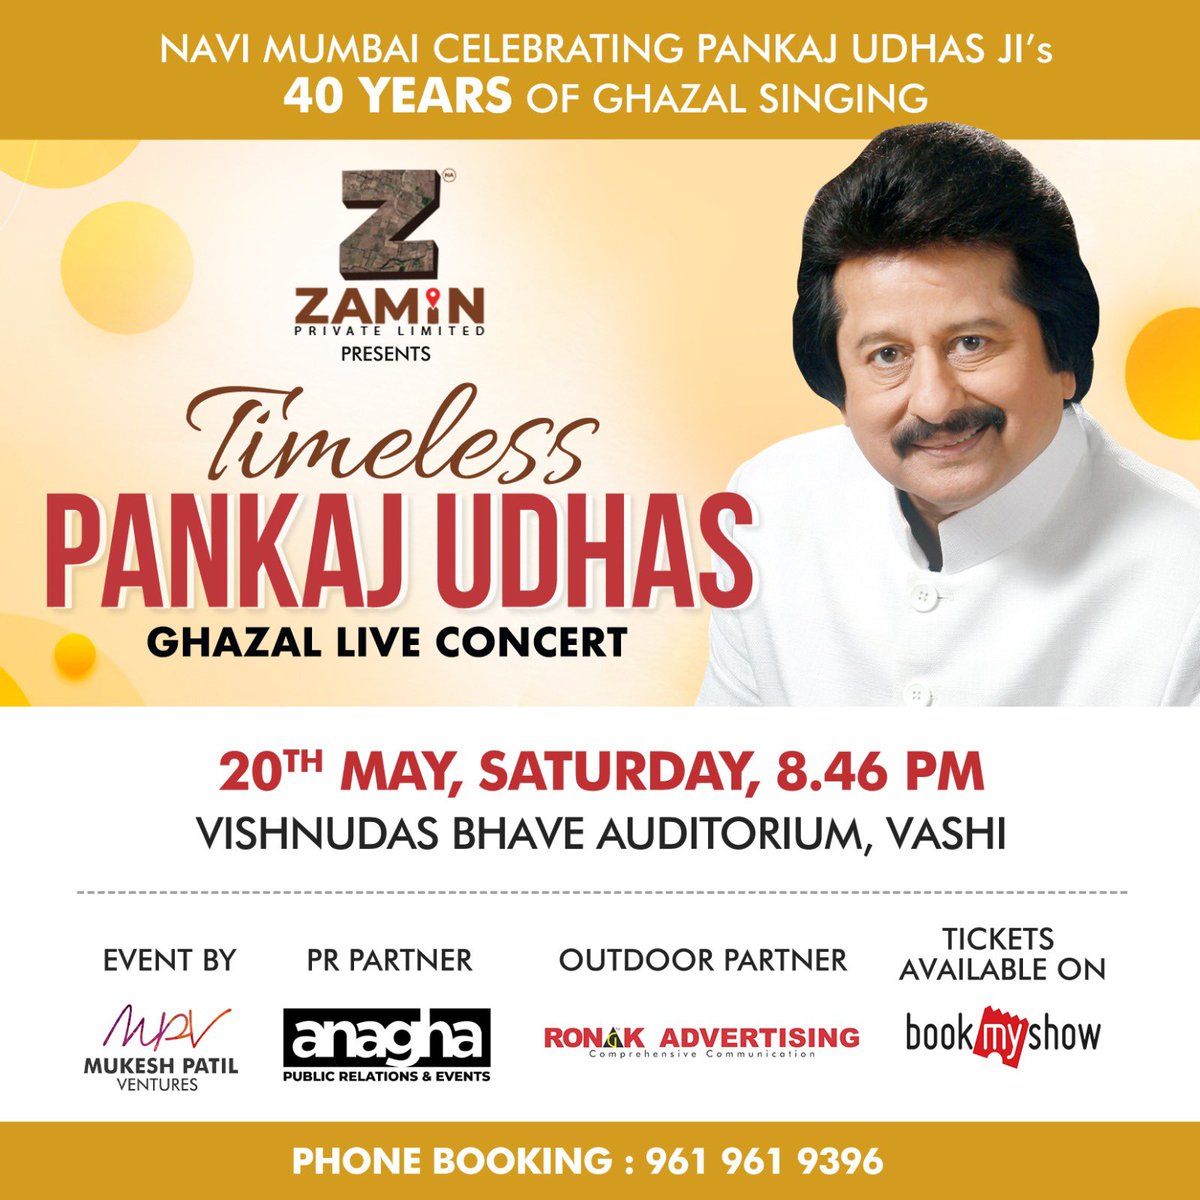 Performing after a long time at Vashi (Navi Mumbai) Timeless Pankaj Udhas concert on Sat 20th May at Vishnudas Bhave Auditorium from 8.45 pm tickets on bookmyshow.com or call 961 961 9396 Don’t miss it be there